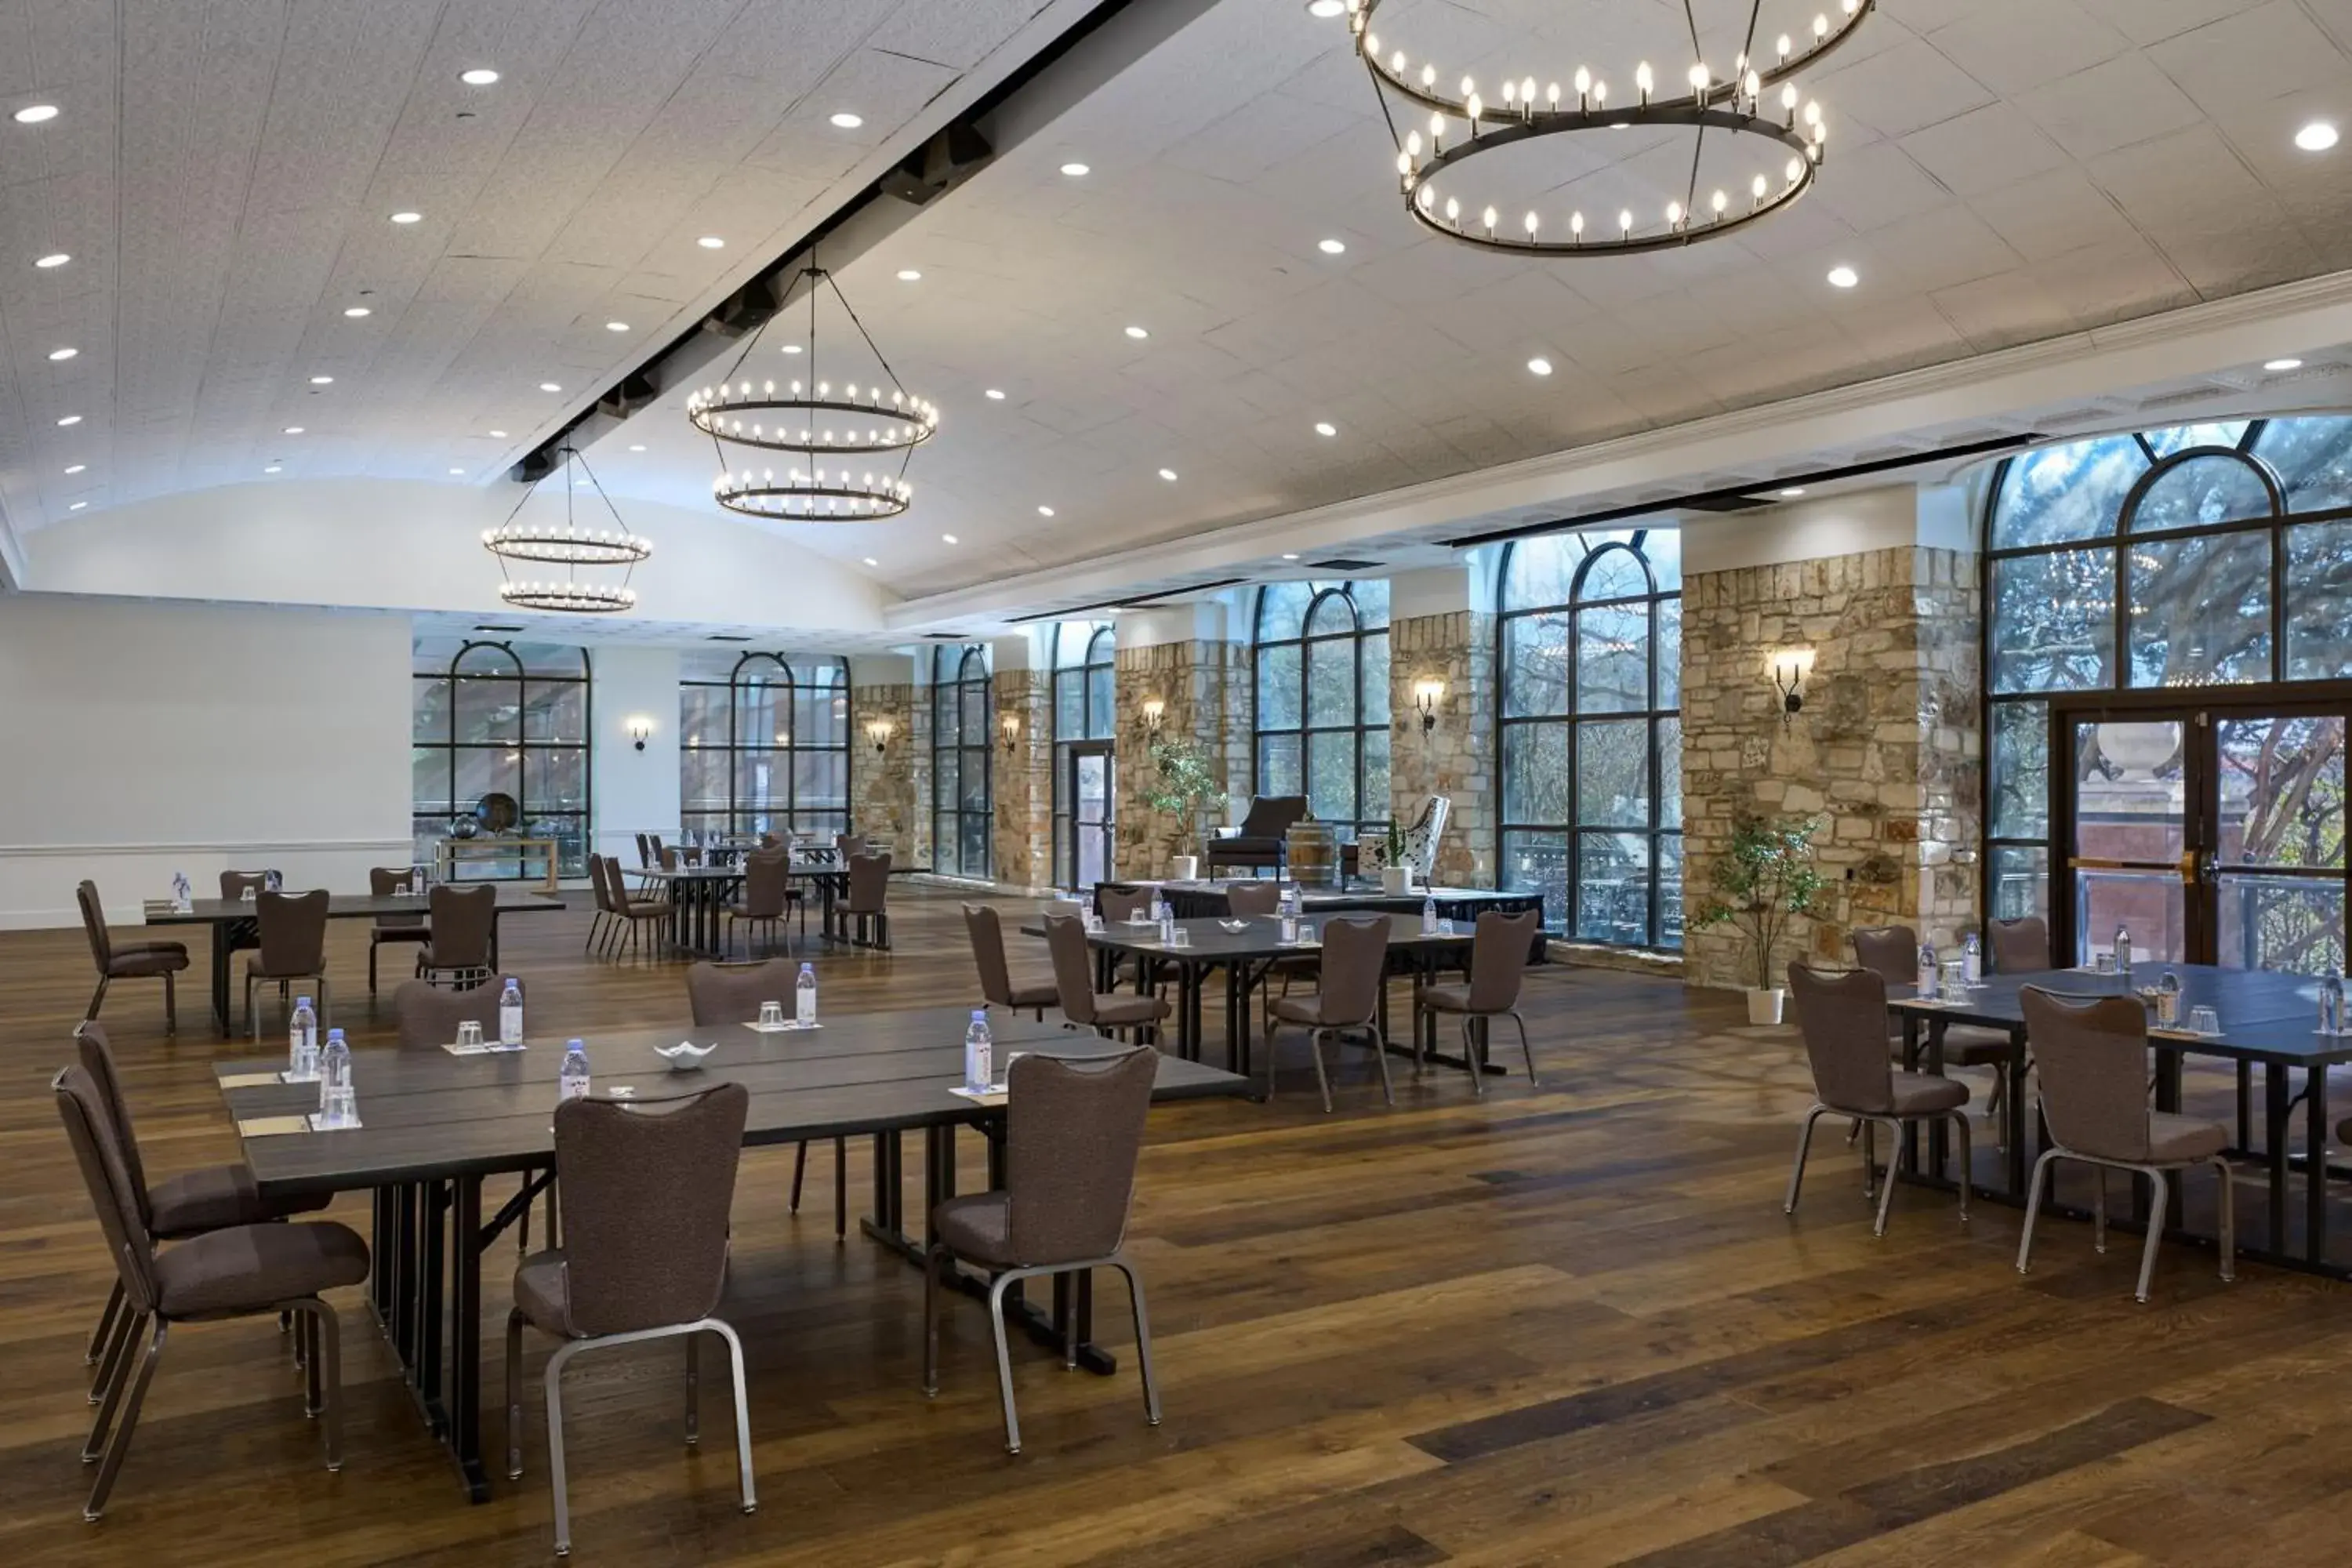 Meeting/conference room, Restaurant/Places to Eat in Renaissance Austin Hotel